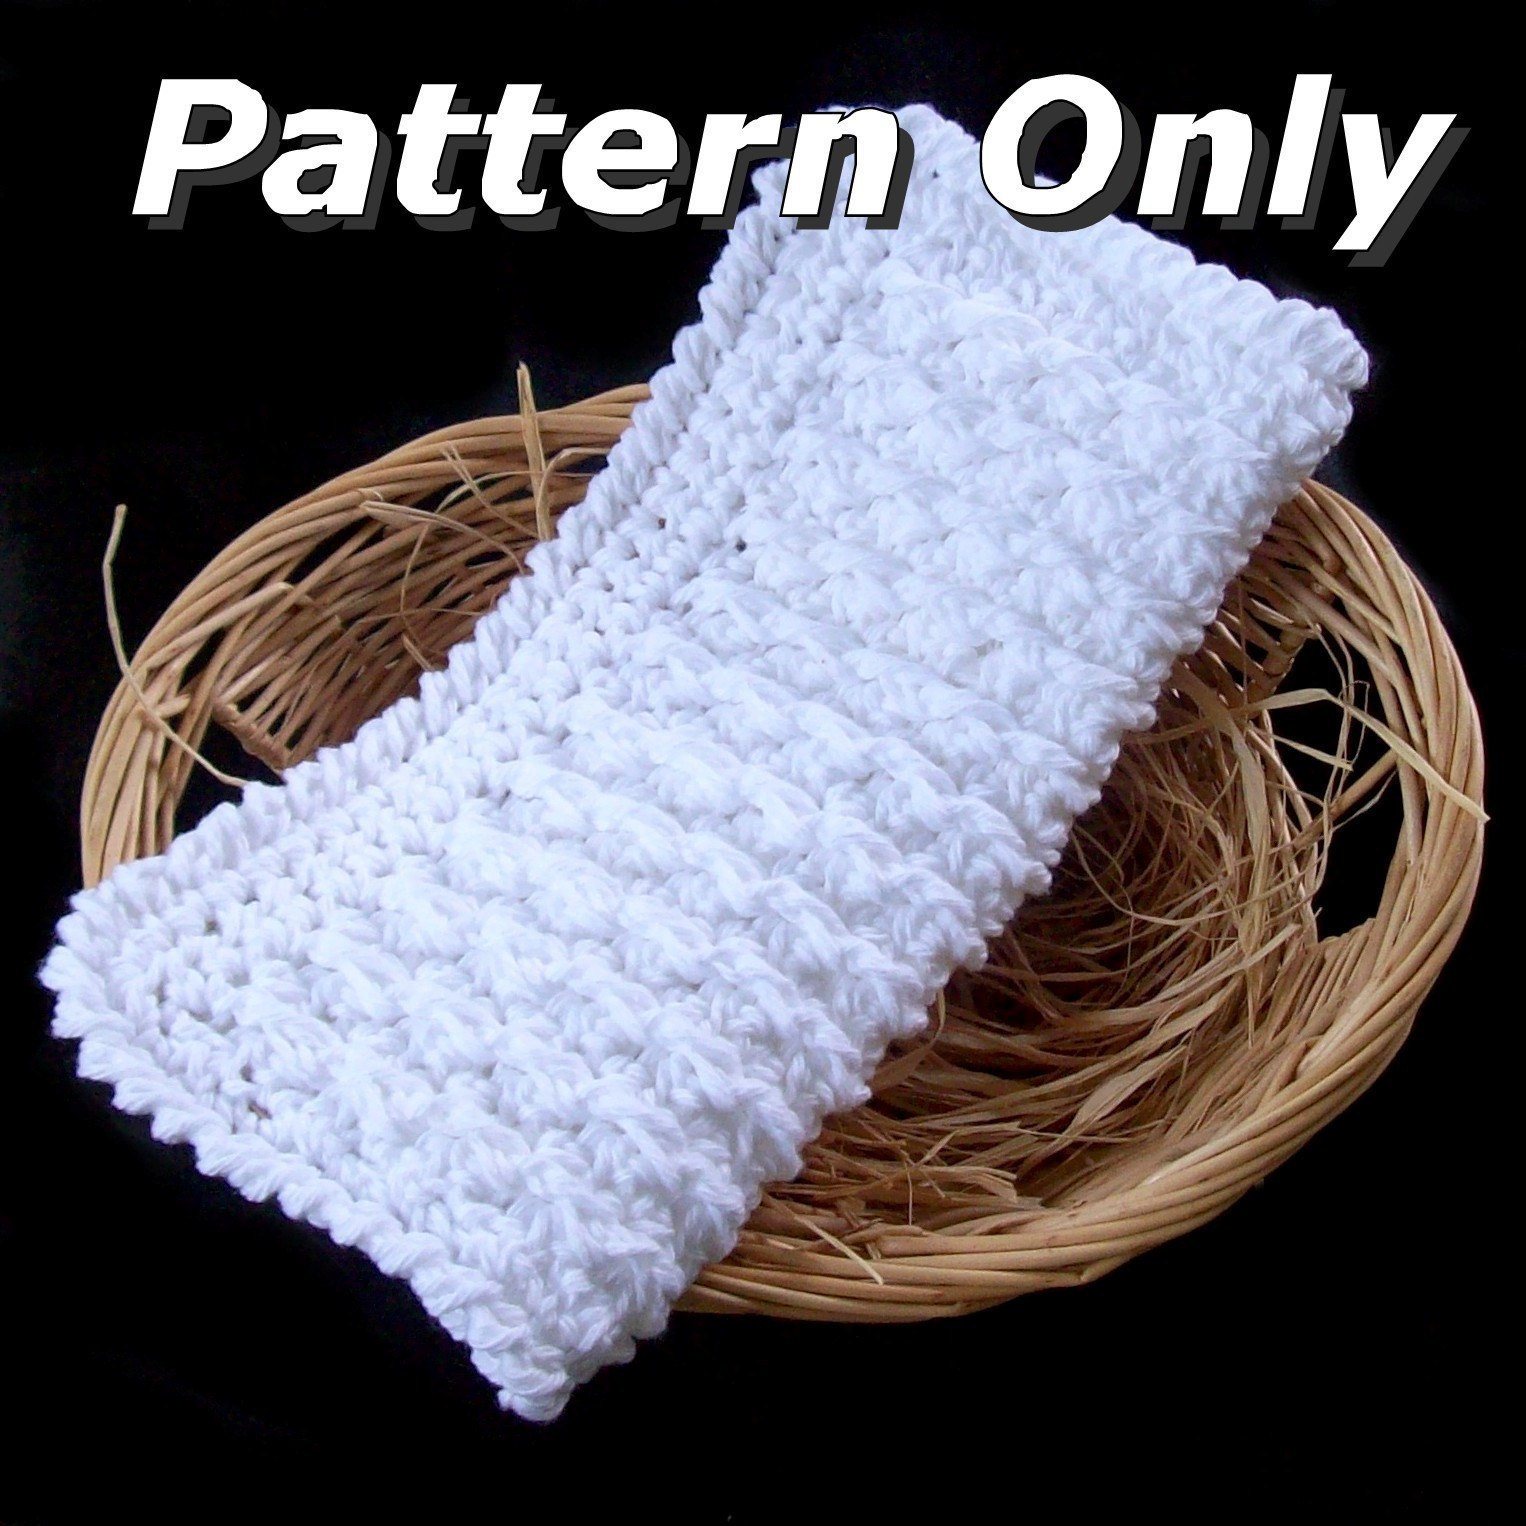 PATTERN FOR CROCHETED DISH CLOTH – Easy Crochet Patterns